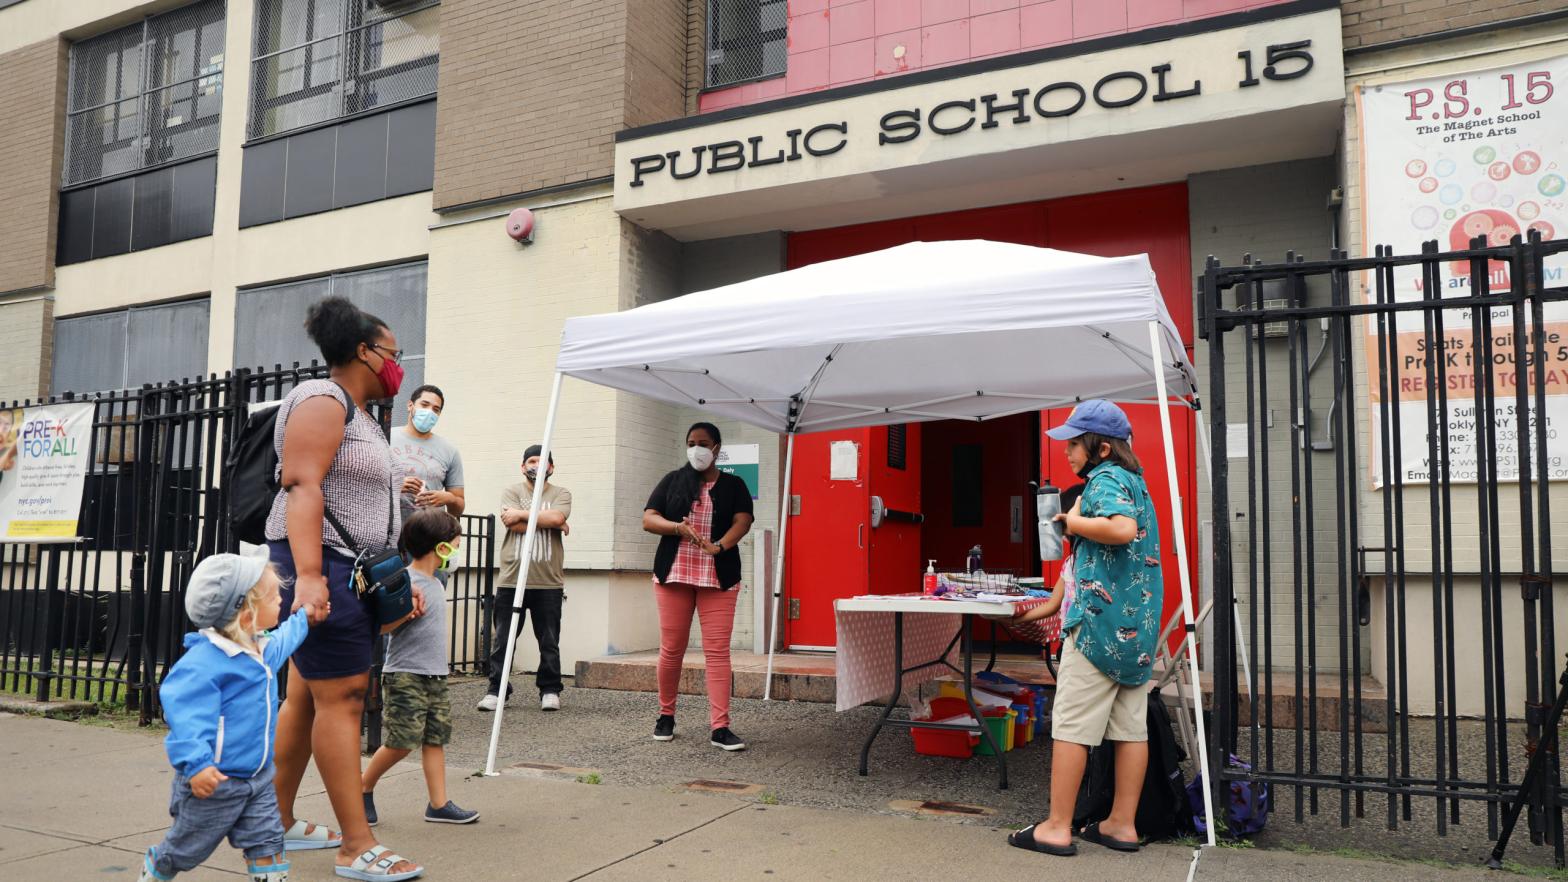 City council members, parents, and students participate in an outdoor learning demonstration in front of a public school in the Red Hook, Brooklyn area of New York on September 2, 2020.  (Photo: Spencer Platt, Getty Images)